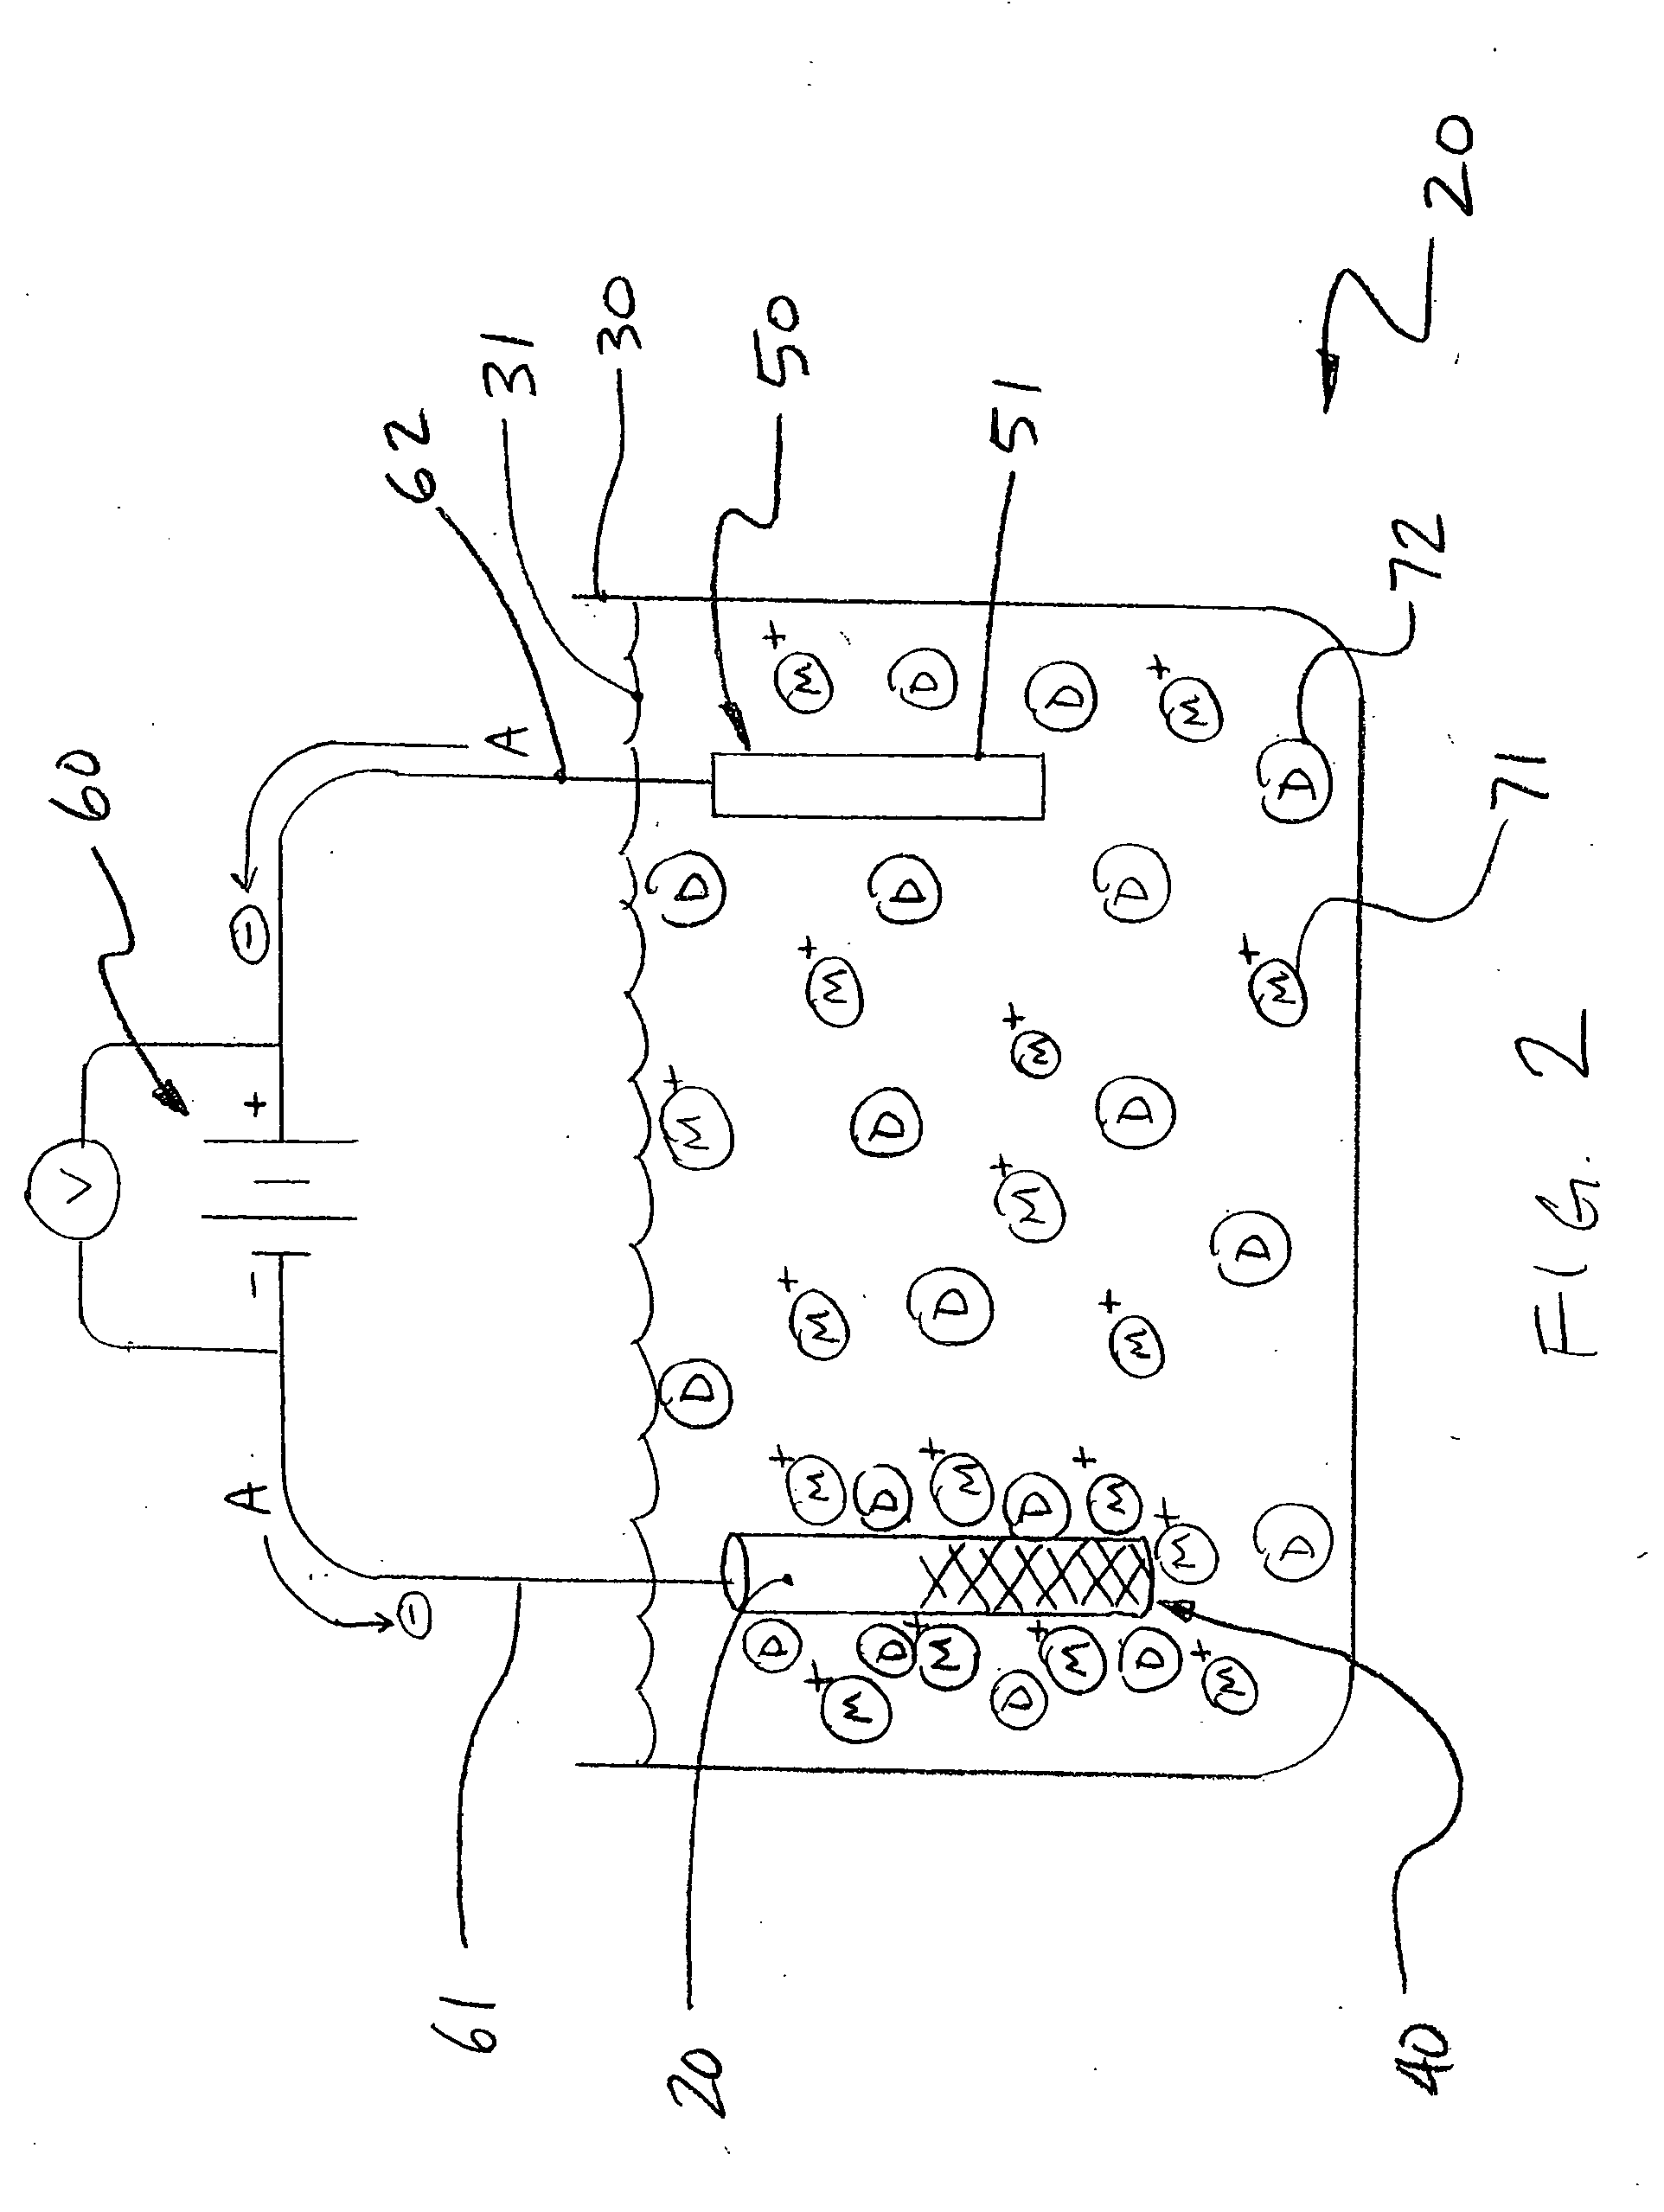 Method and apparatus for coating a medical device by electroplating